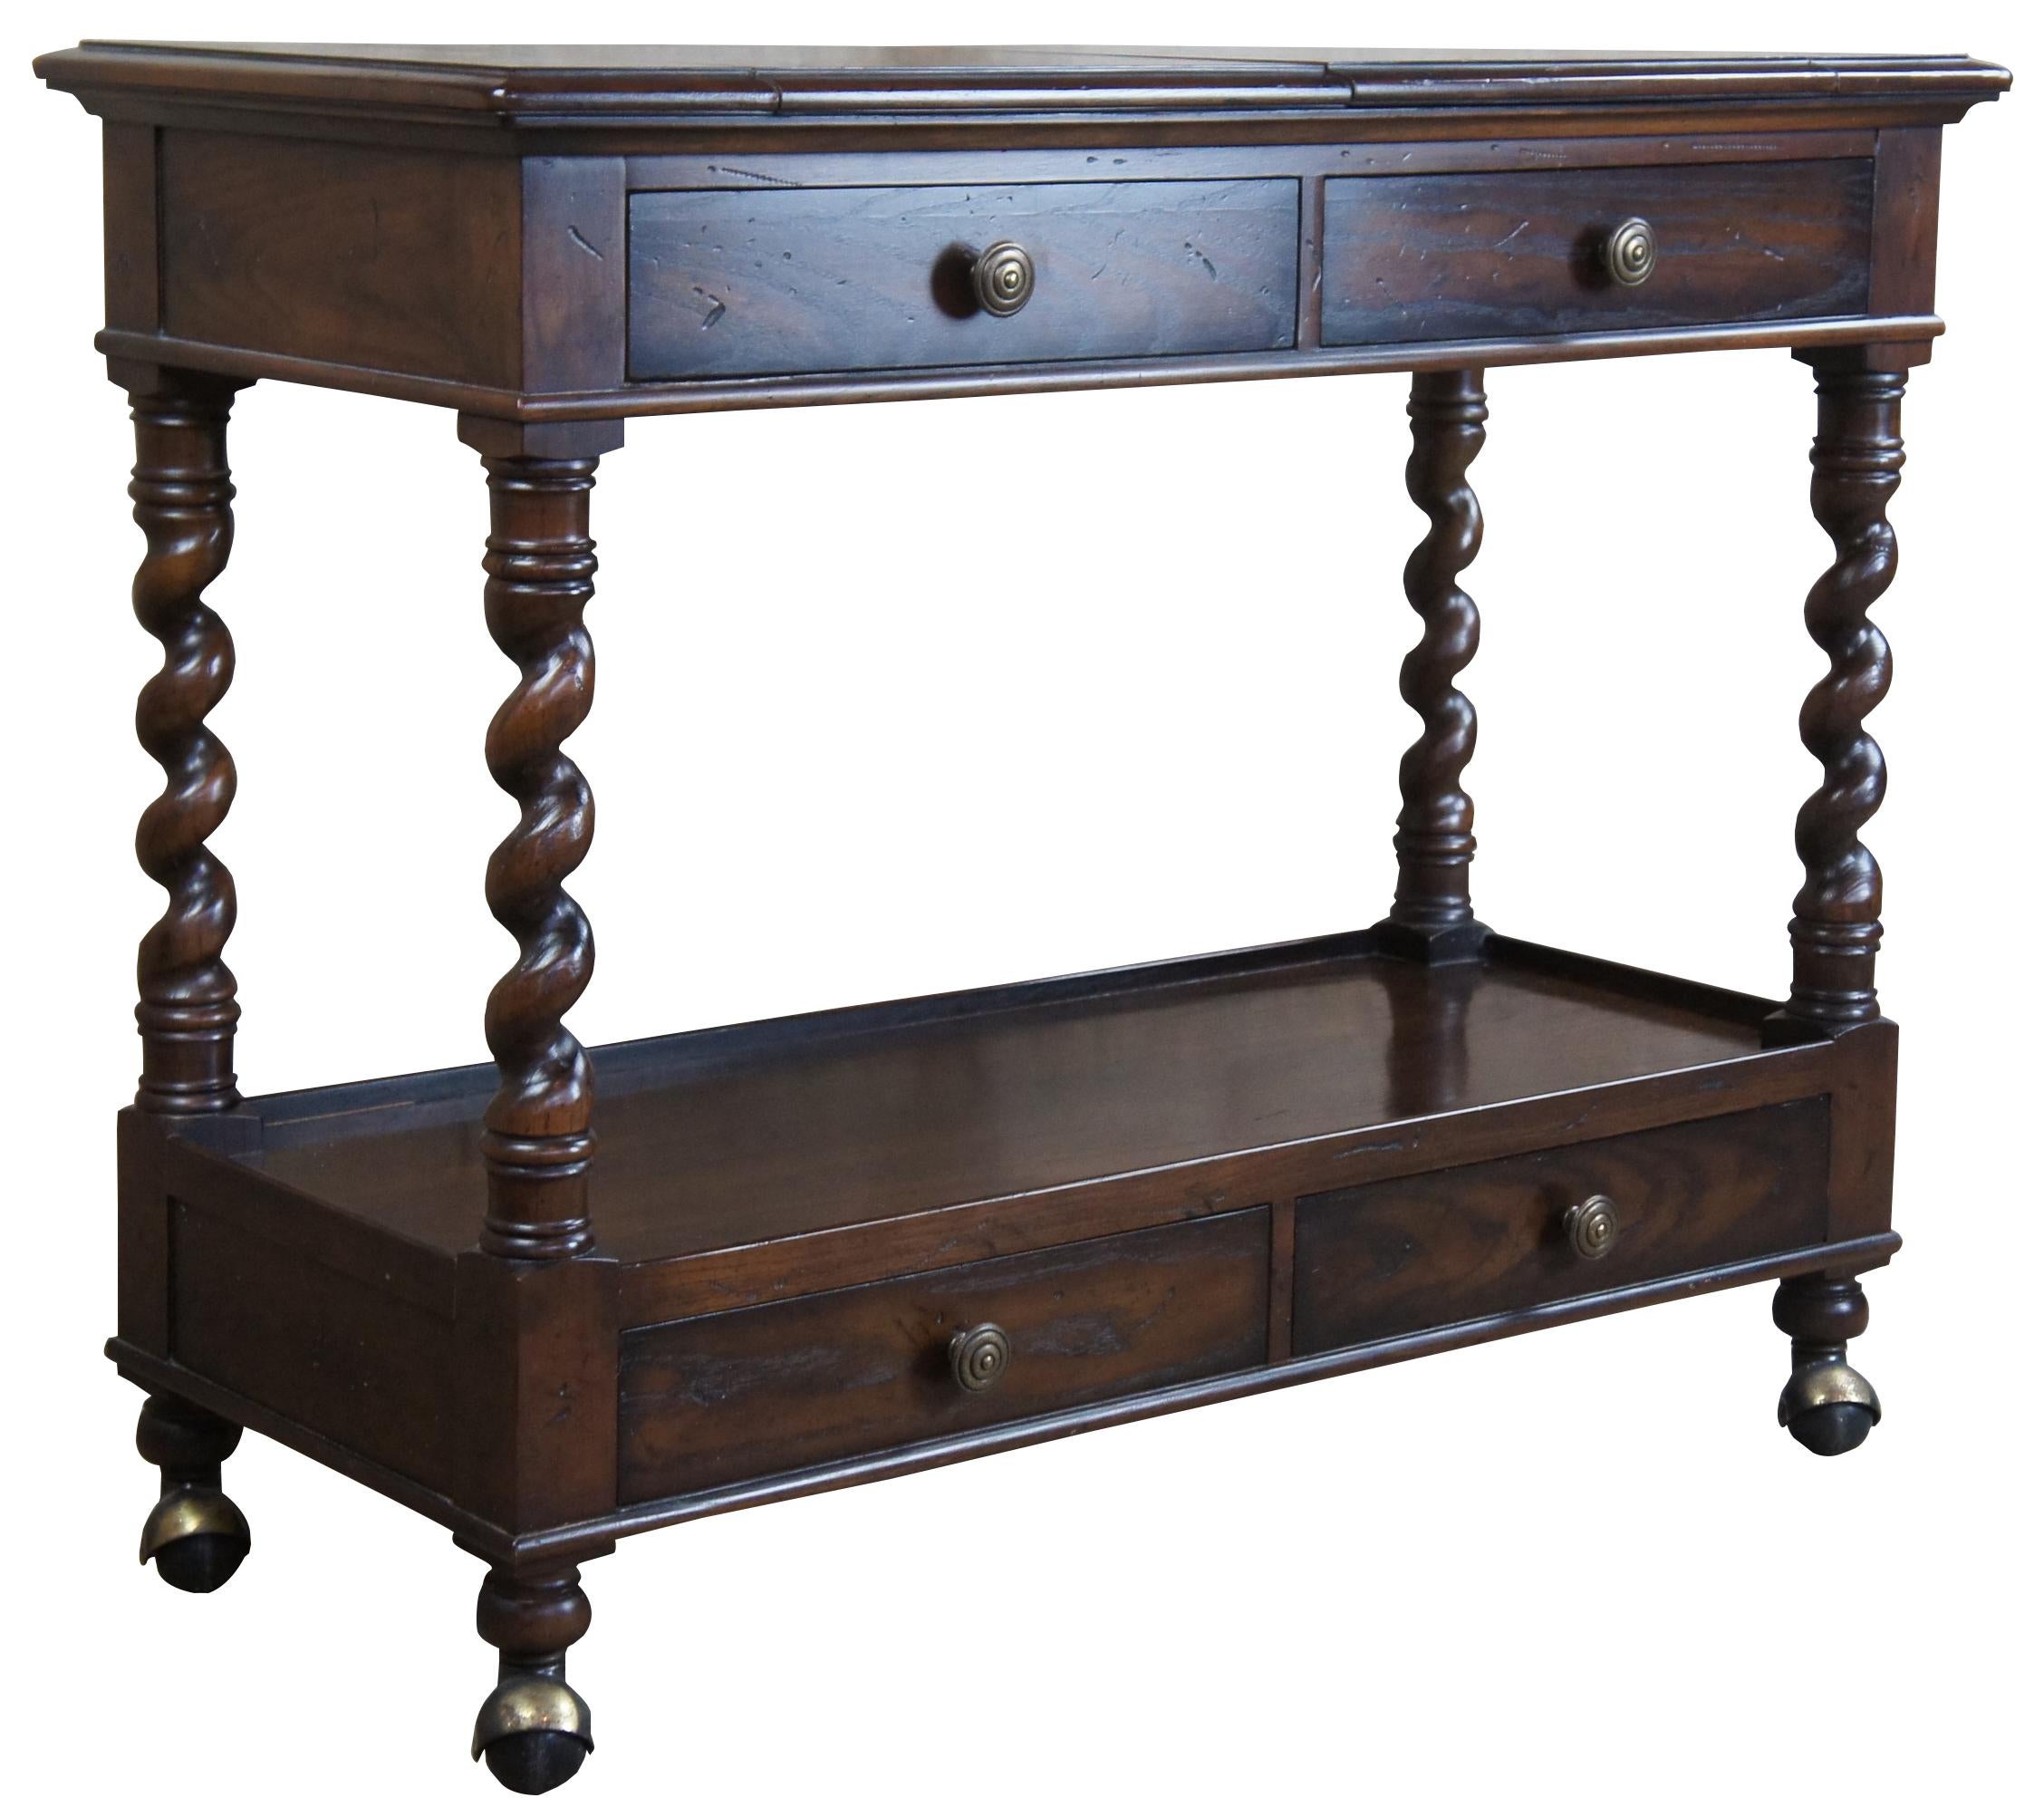 Vintage Henredon four centuries rolling buffet or server. Made of oak, featuring a flip top that opens over four barley twisted supports between two sets of drawers and large castors.

Measure: Width open - 56